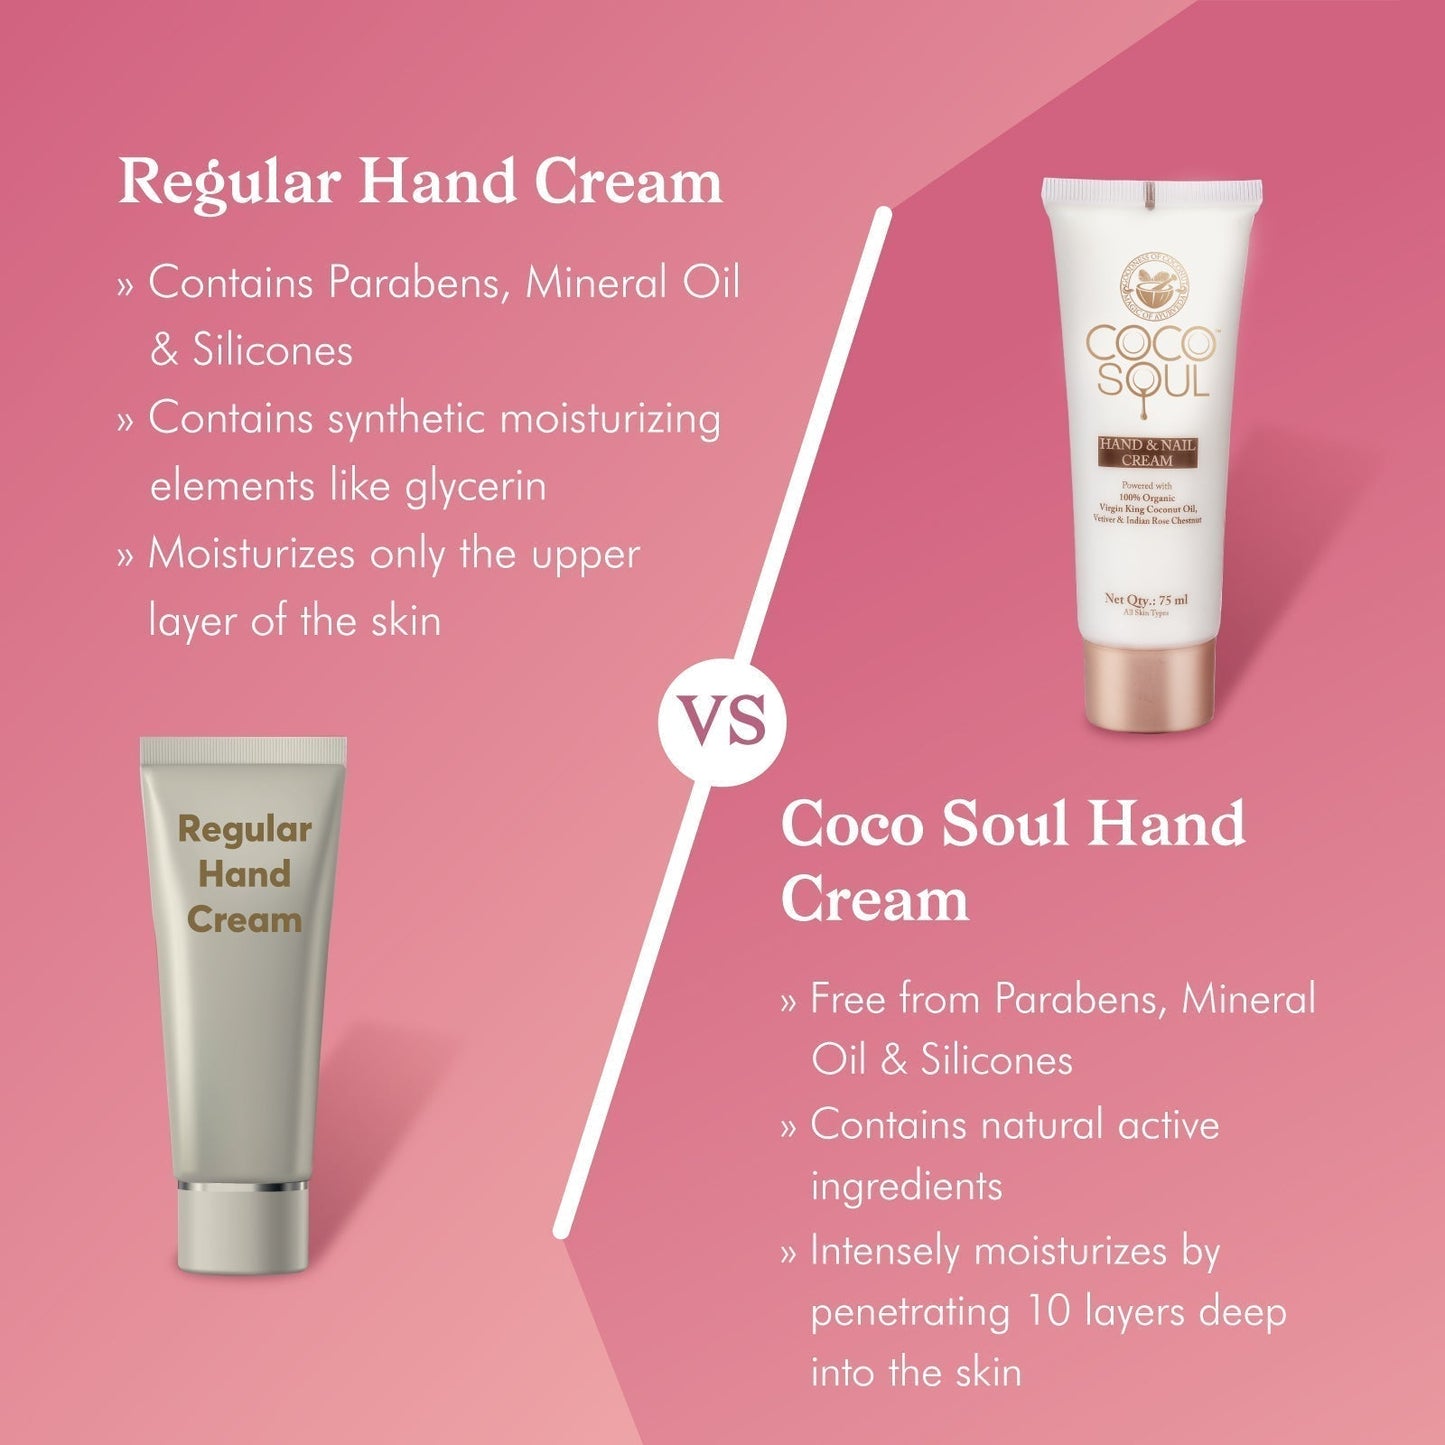 BOGO Hand Cream  From the makers of Parachute Advansed  75ml